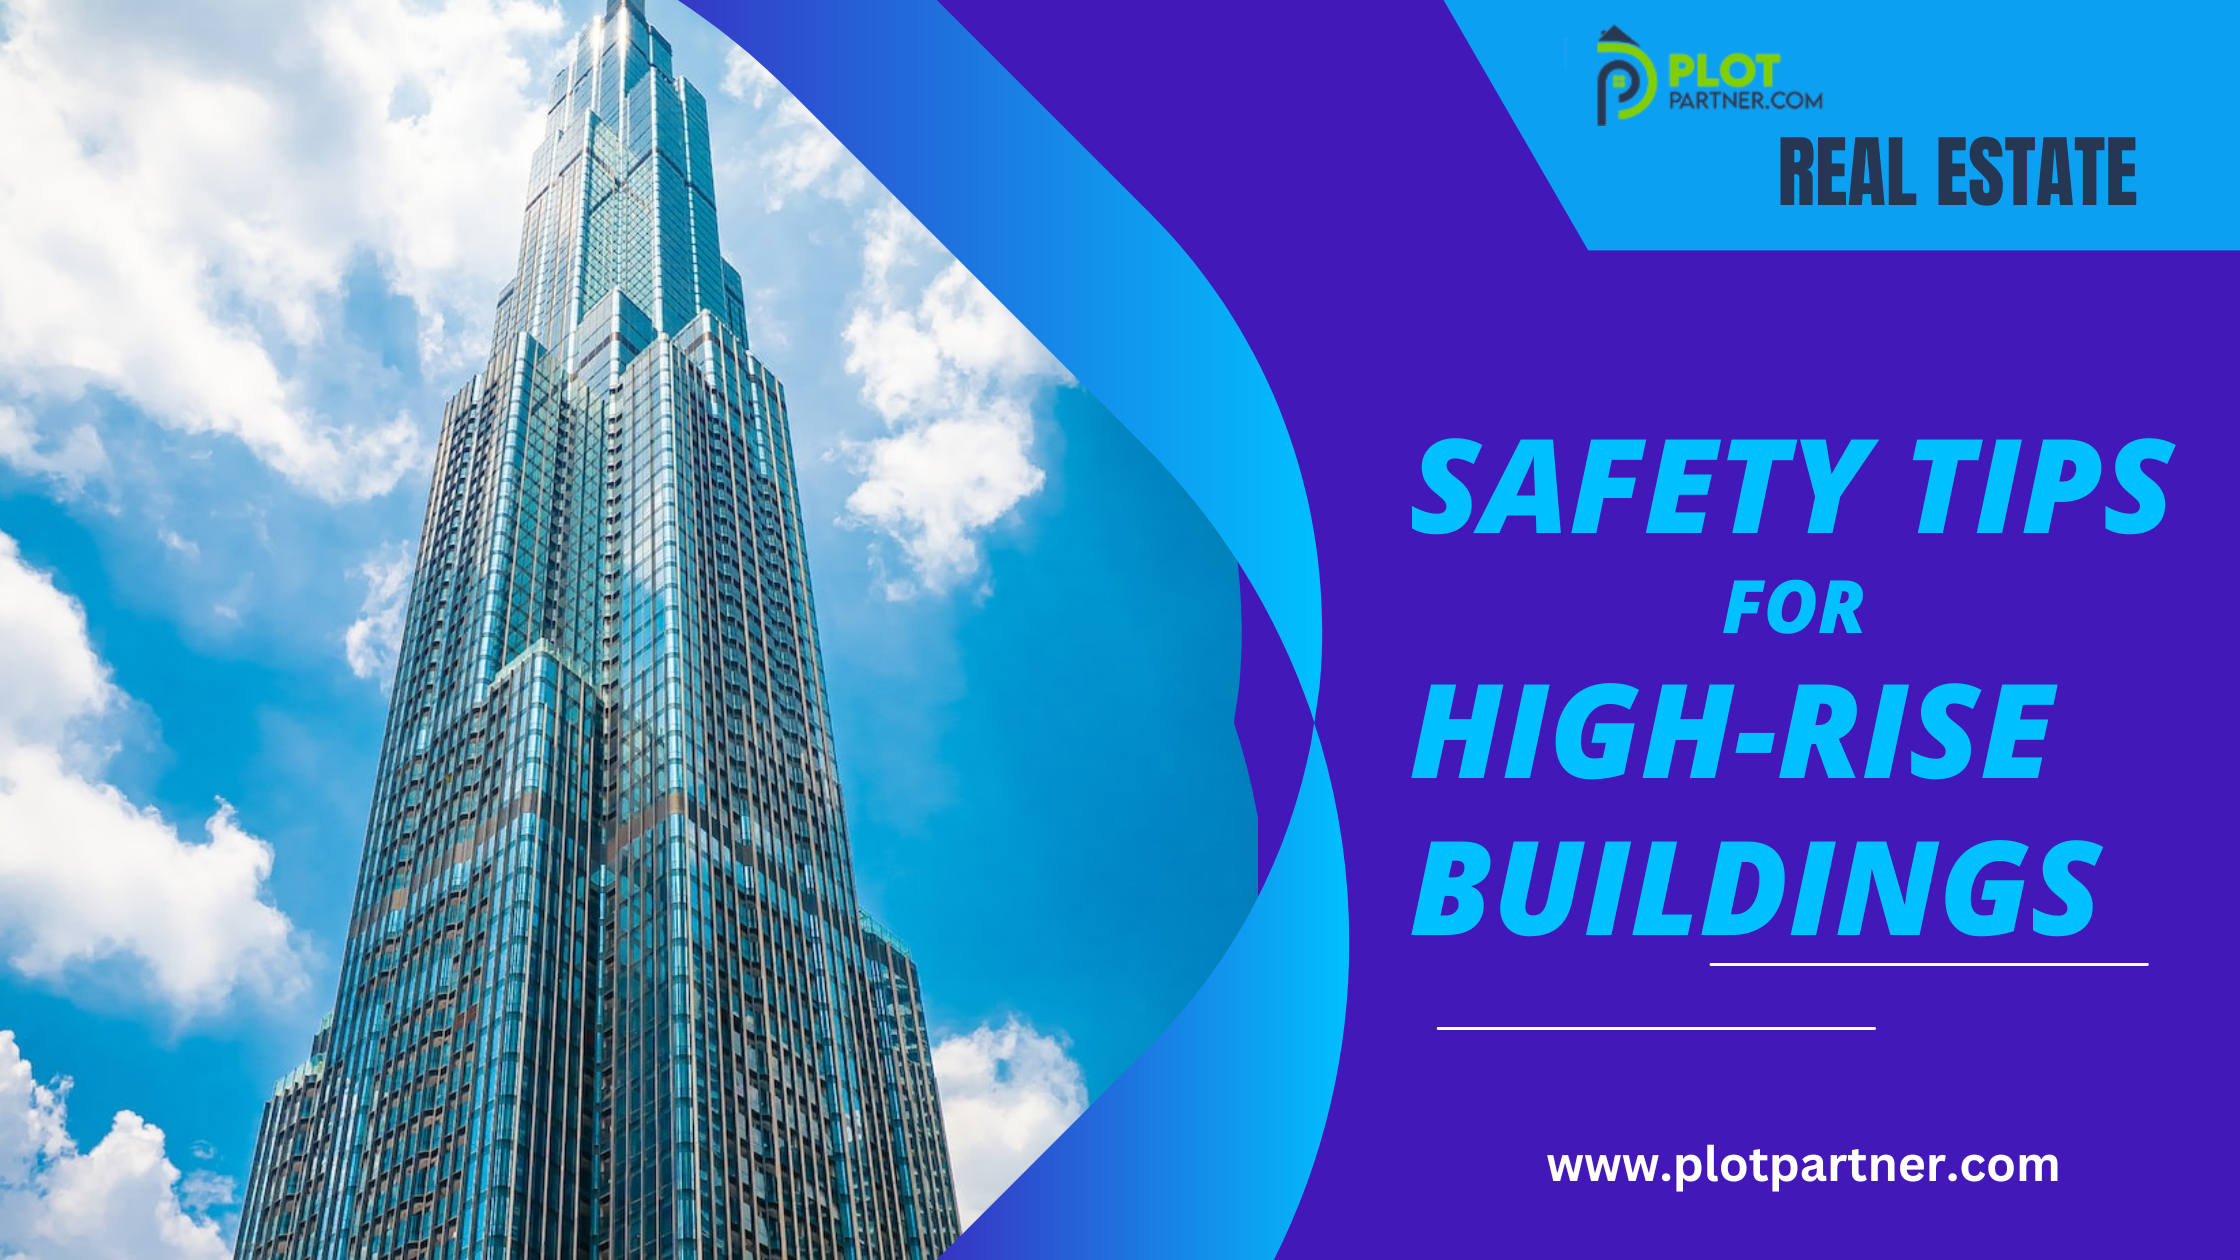 6 Safety Tips for High-Rise Buildings